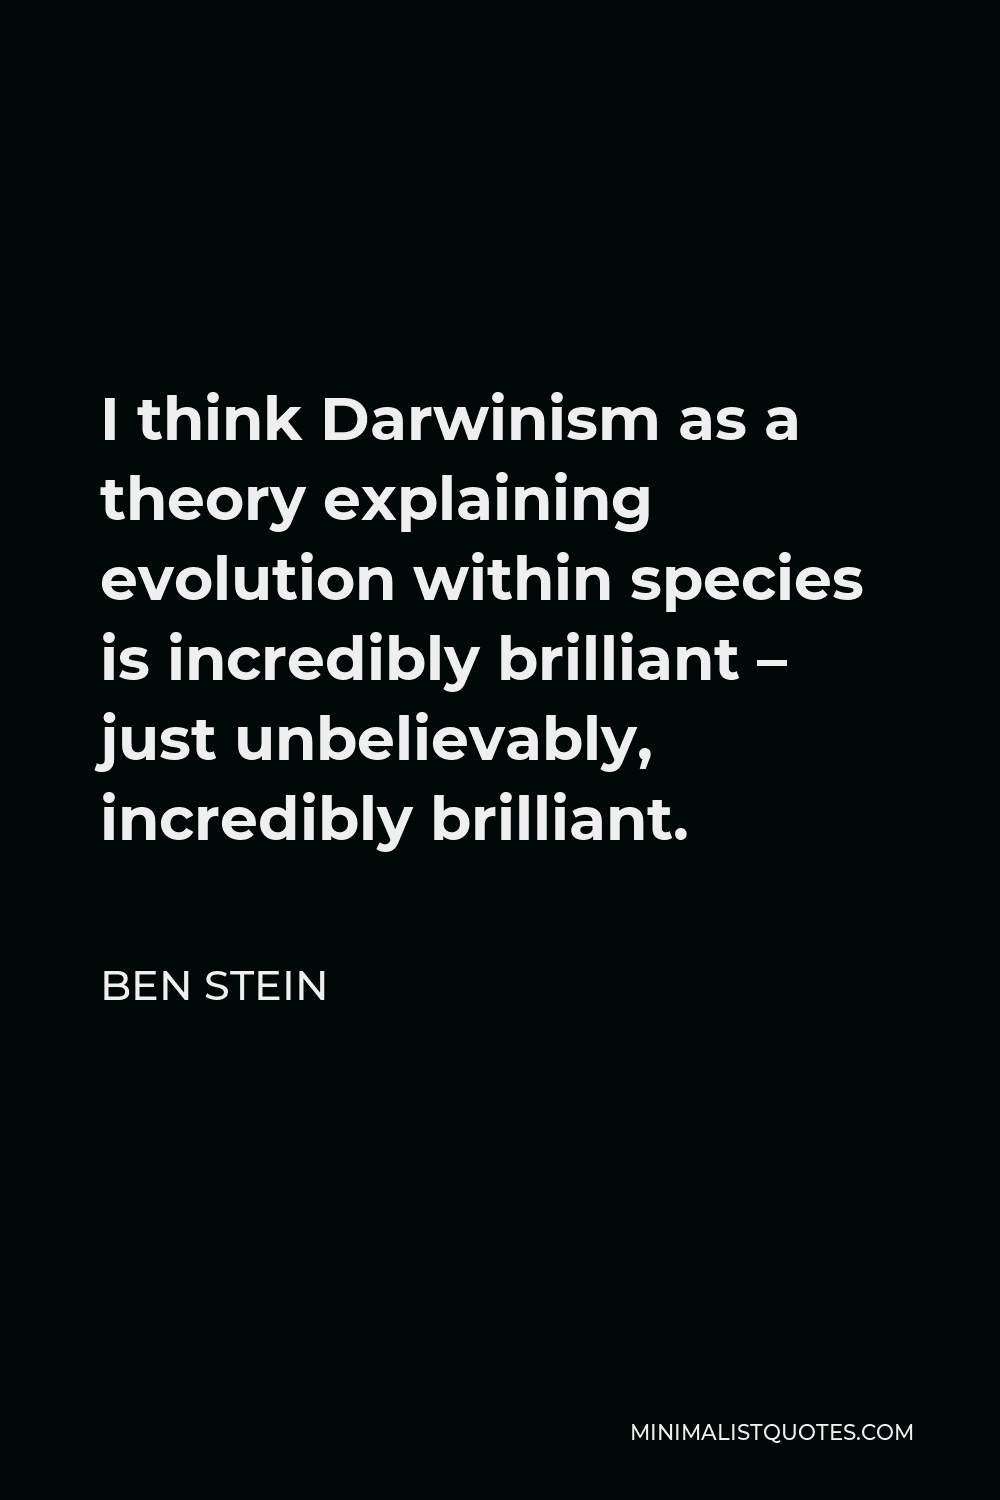 Ben Stein Quote - I think Darwinism as a theory explaining evolution within species is incredibly brilliant – just unbelievably, incredibly brilliant.